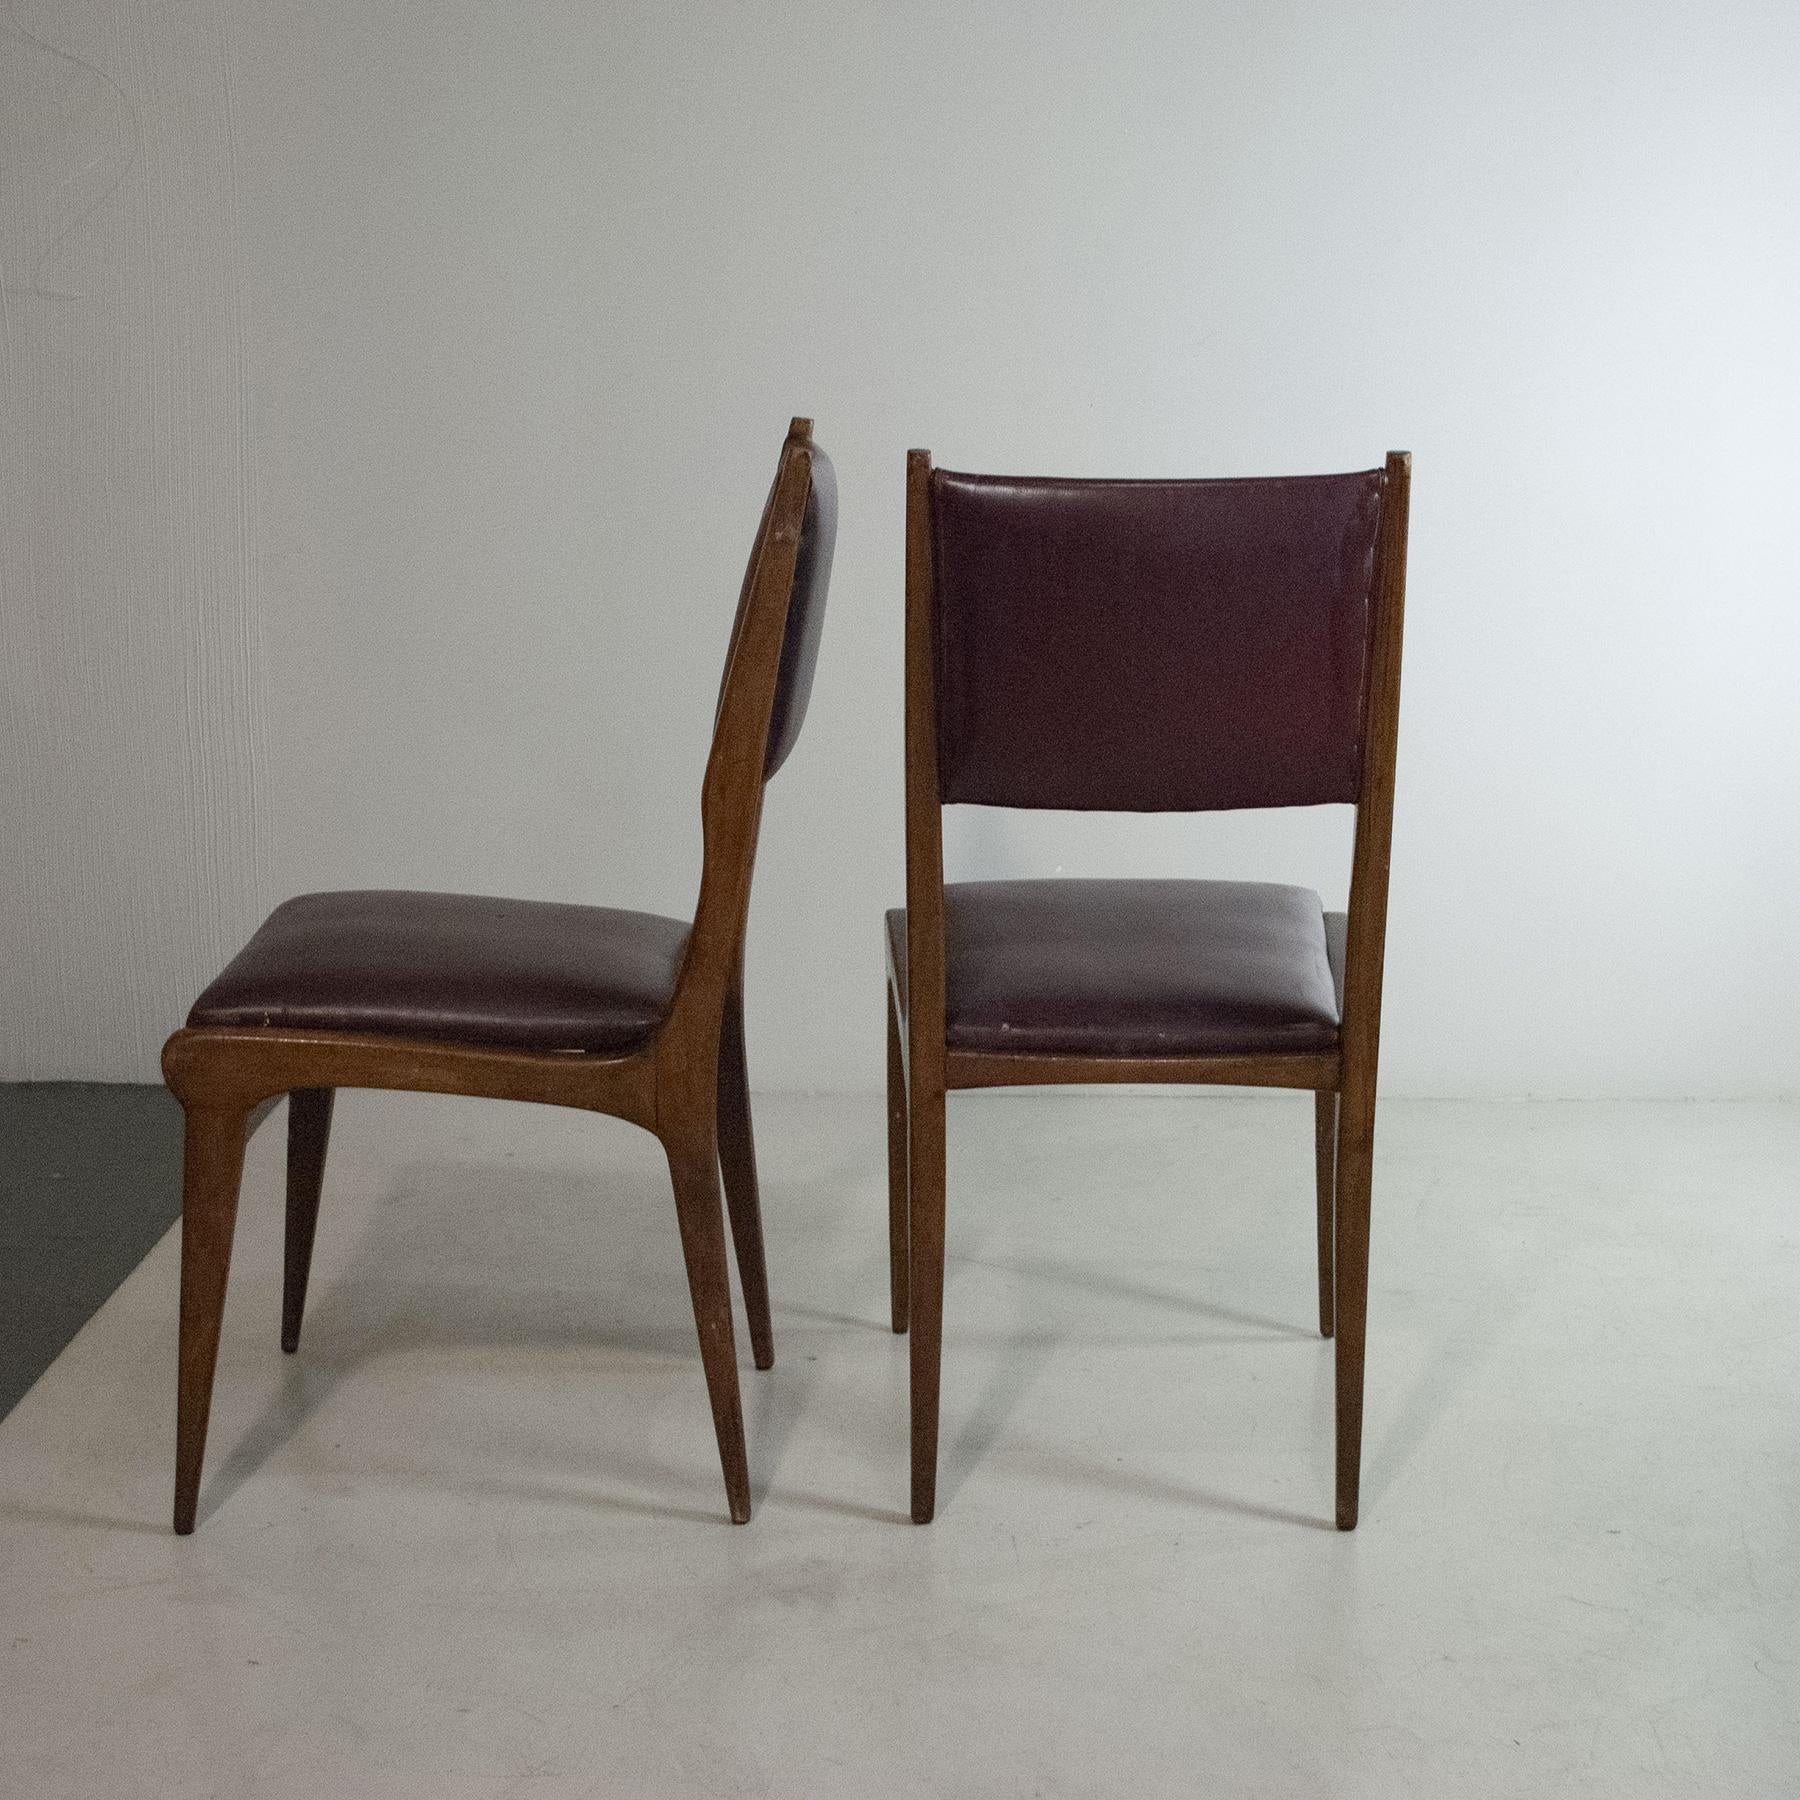 Carlo de Carli in the Style Italian Midcentury Chairs For Sale 7